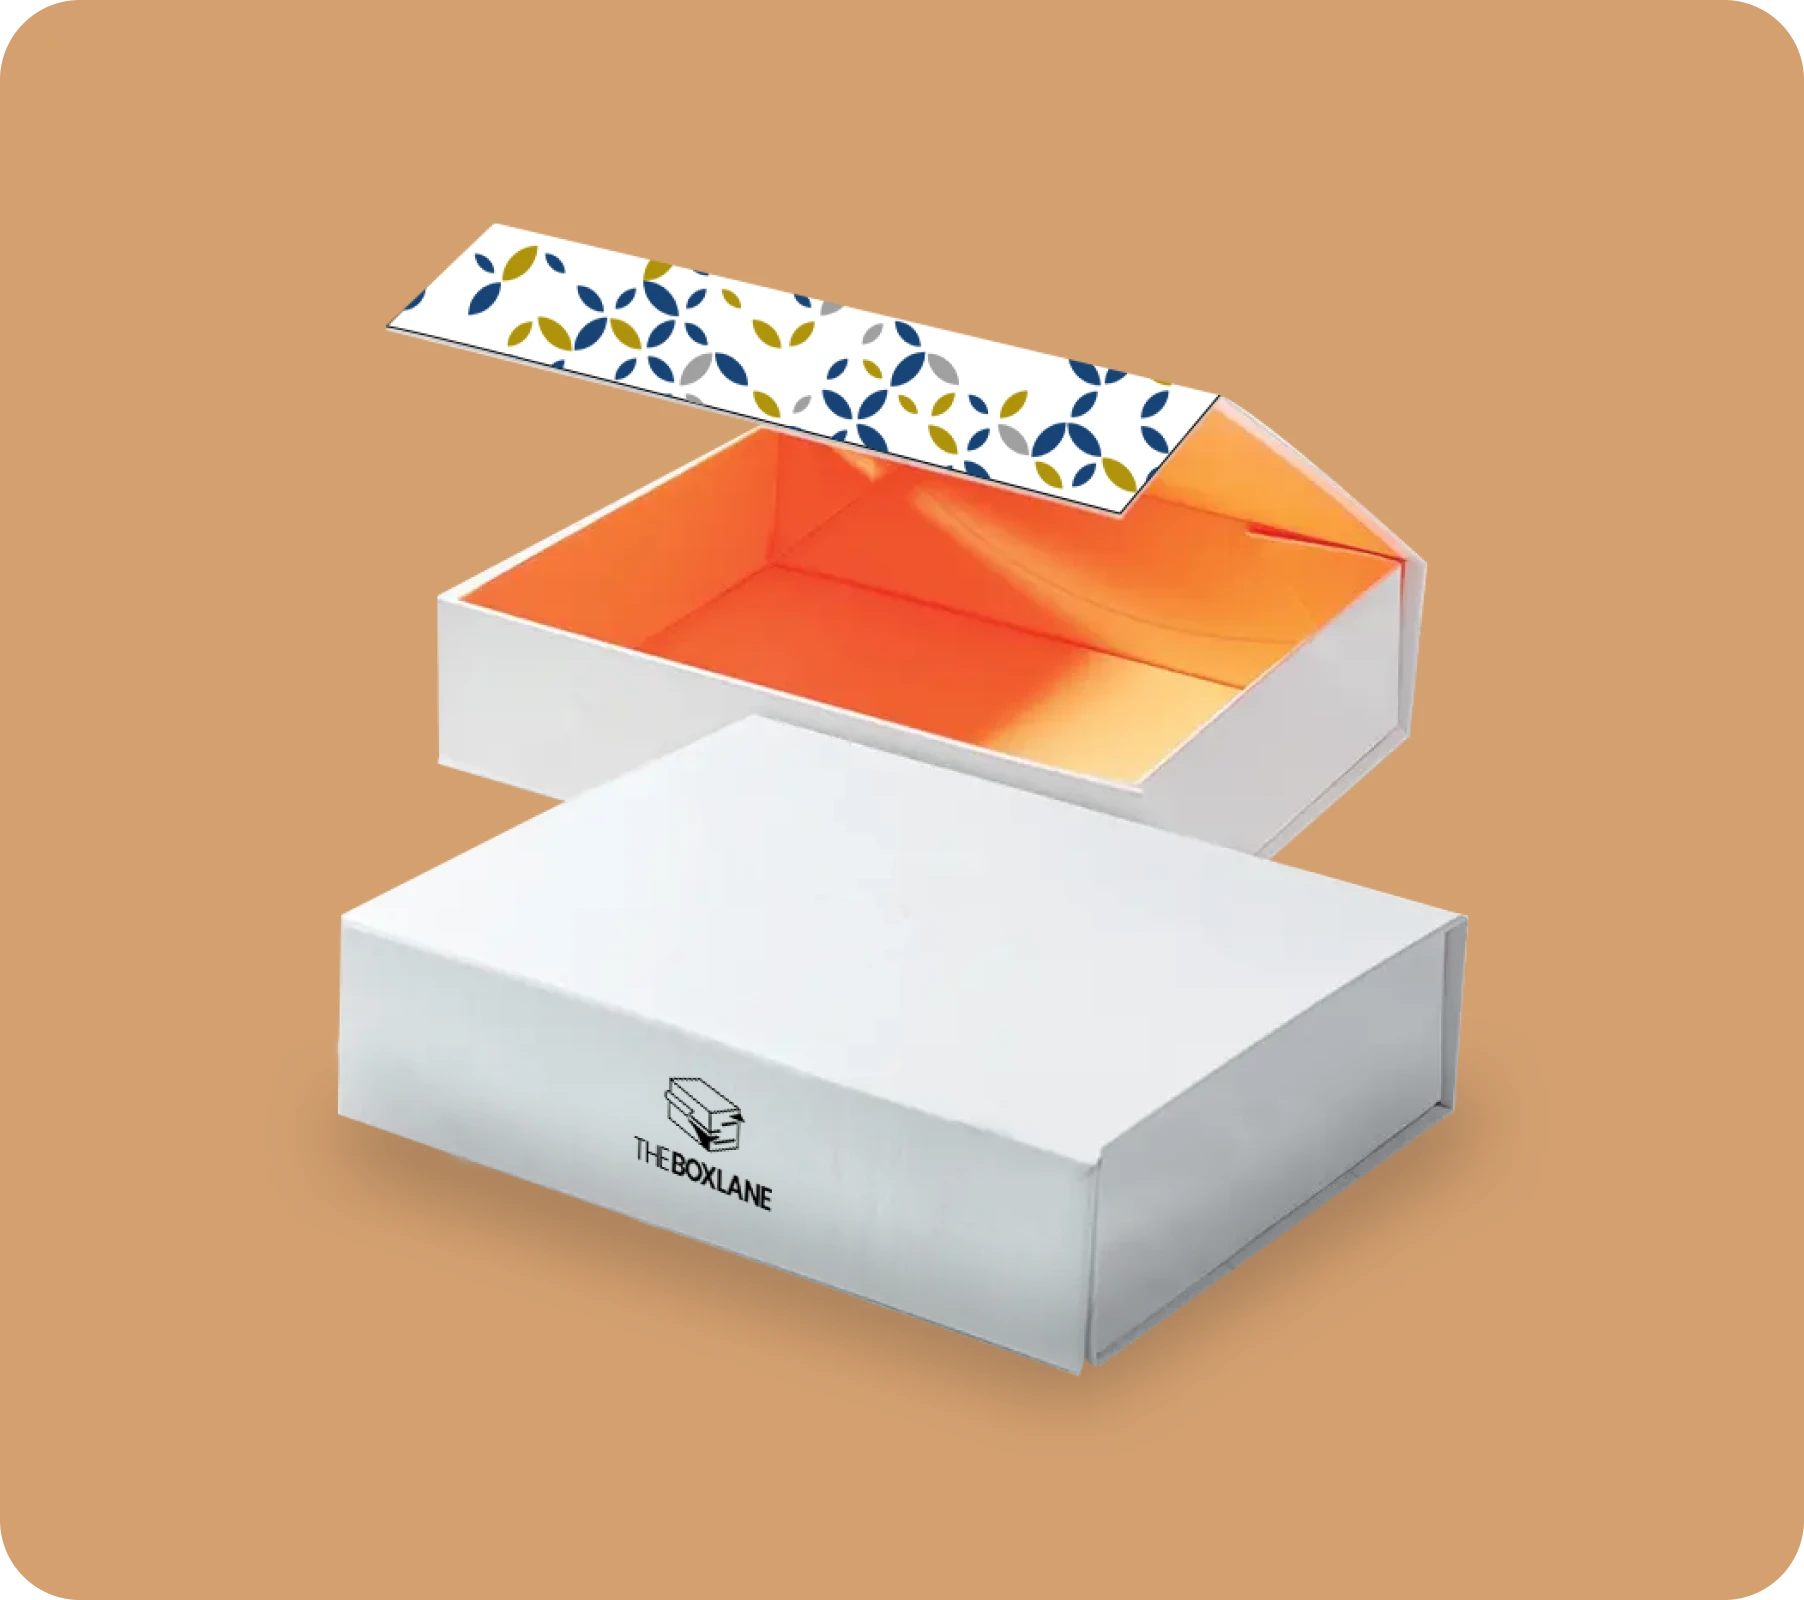 Choose The Box Lane for Magnetic Closure Rigid Boxes Packaging | The Box Lane